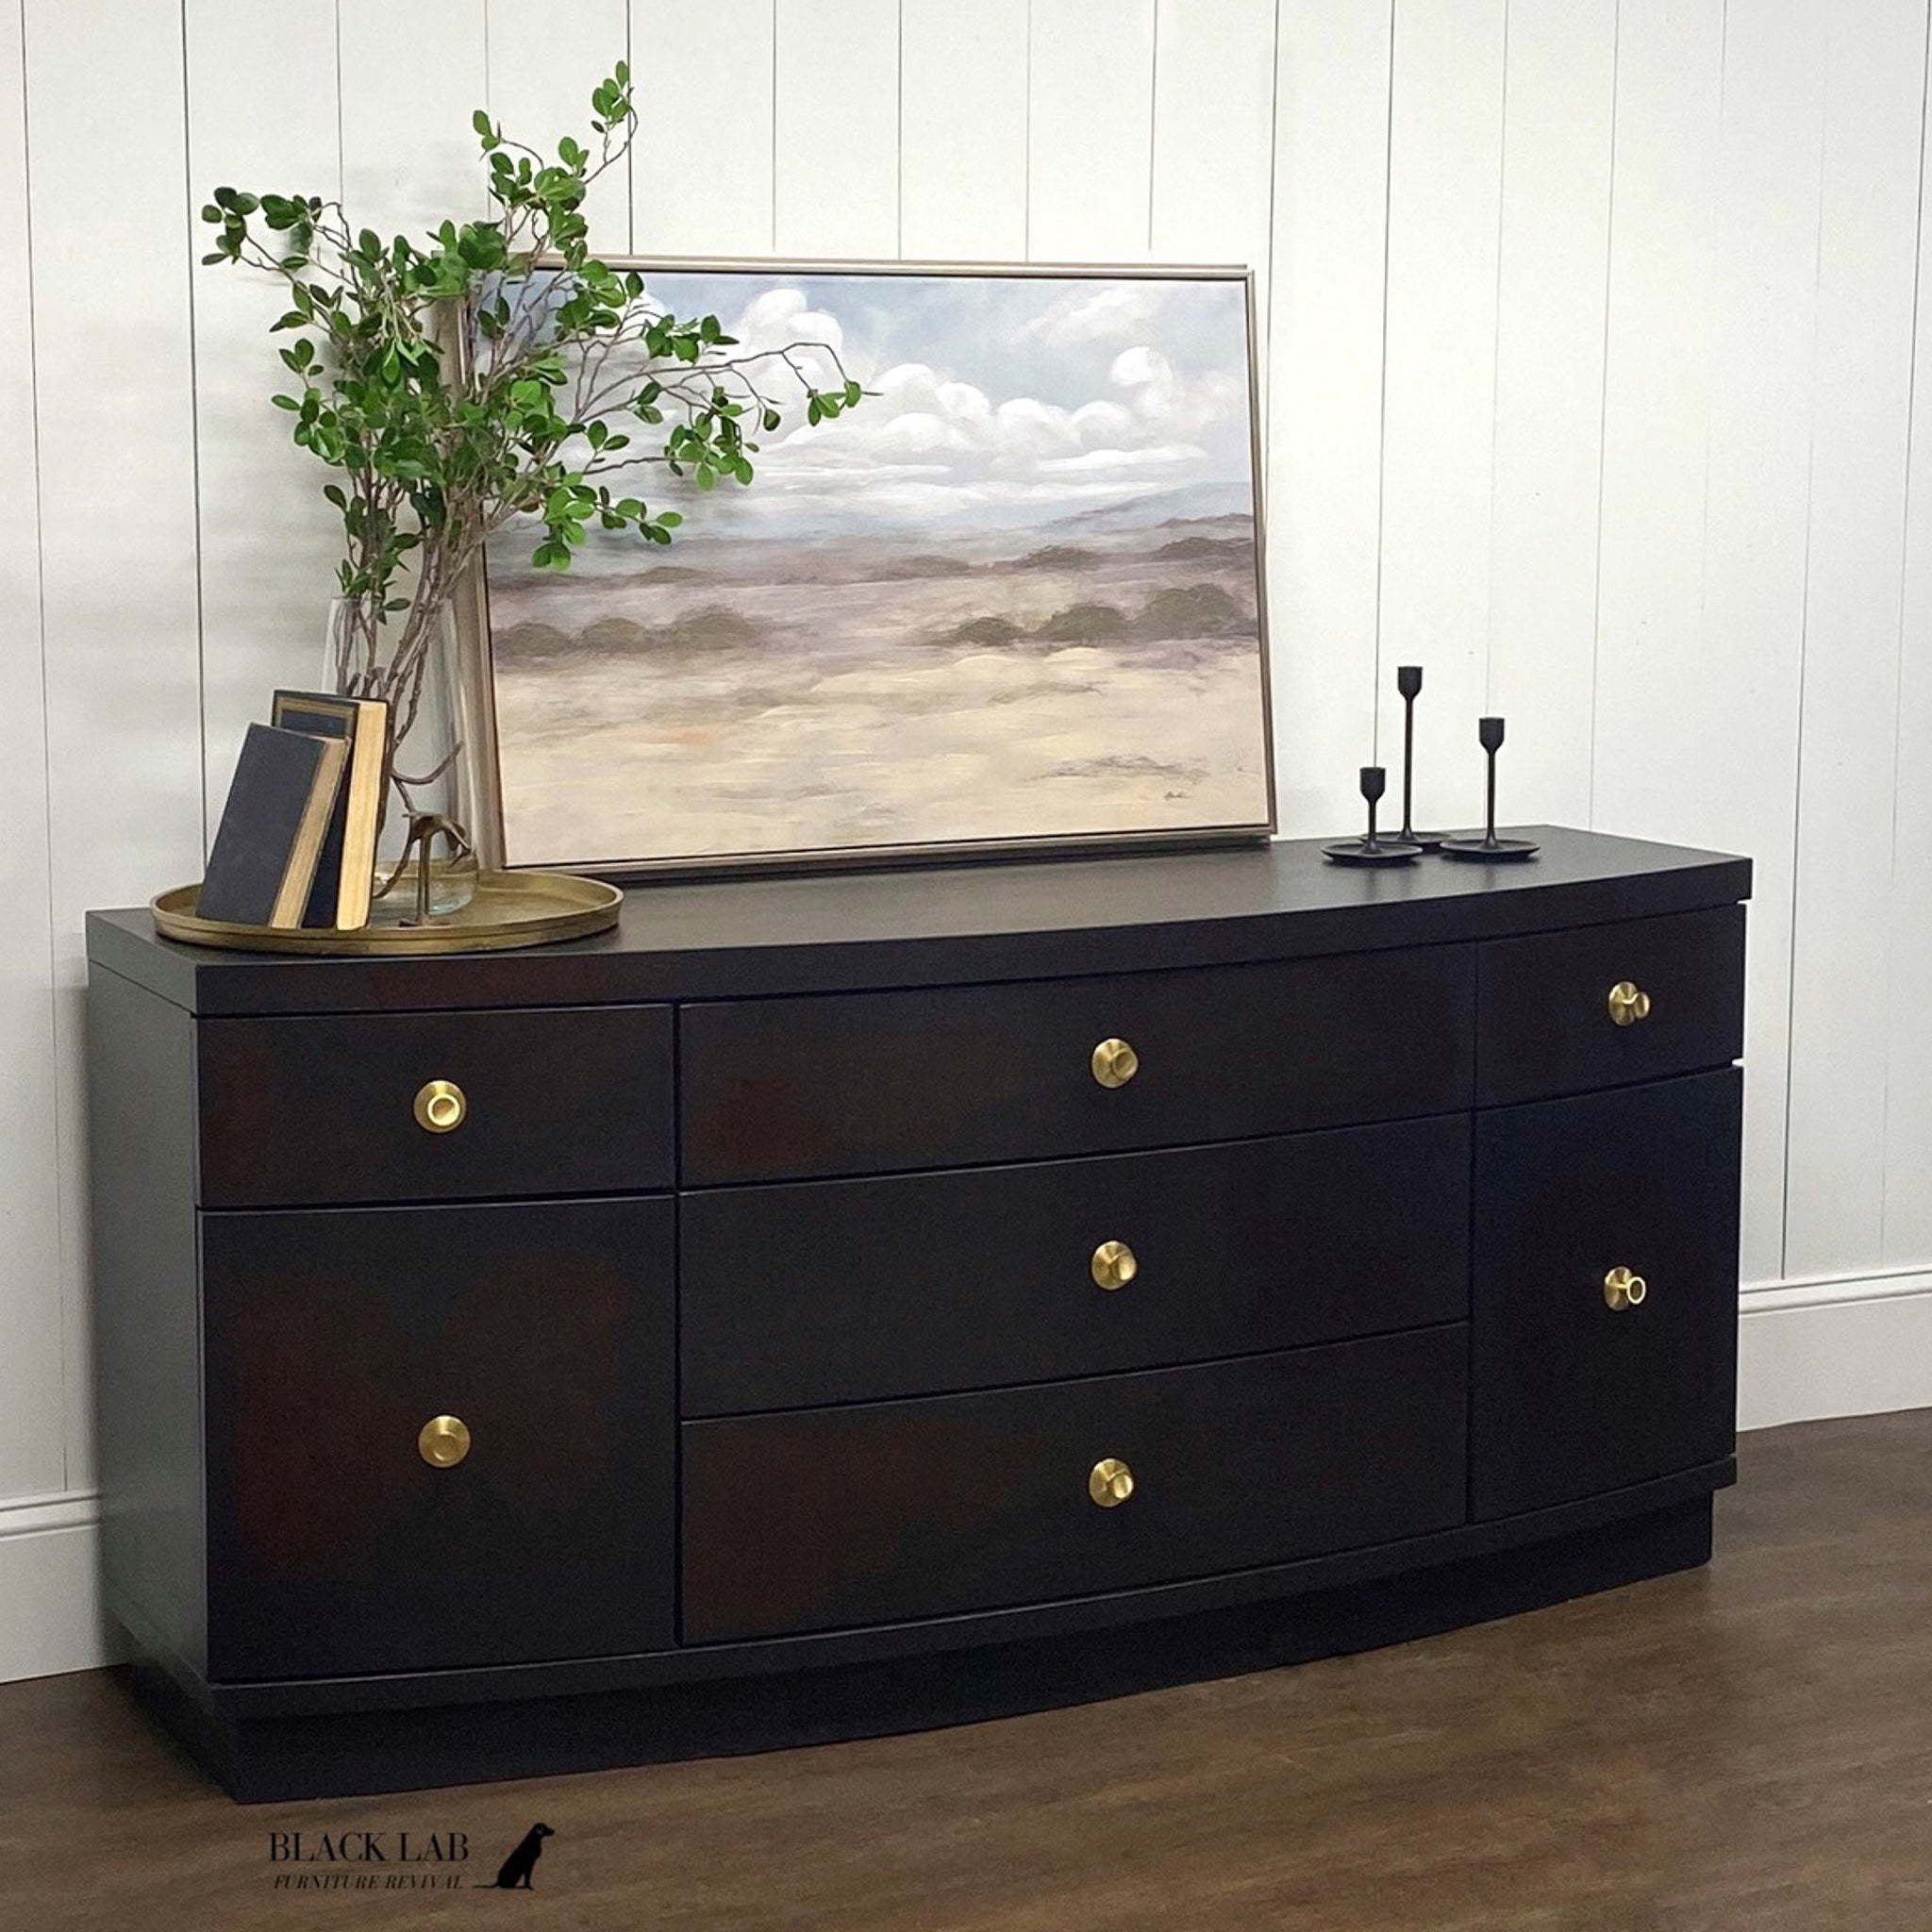 A vintage parge dresser refurbished by Black Lab Furniture Revival is painted in Dixie Belle's Cavier chalk mineral paint.